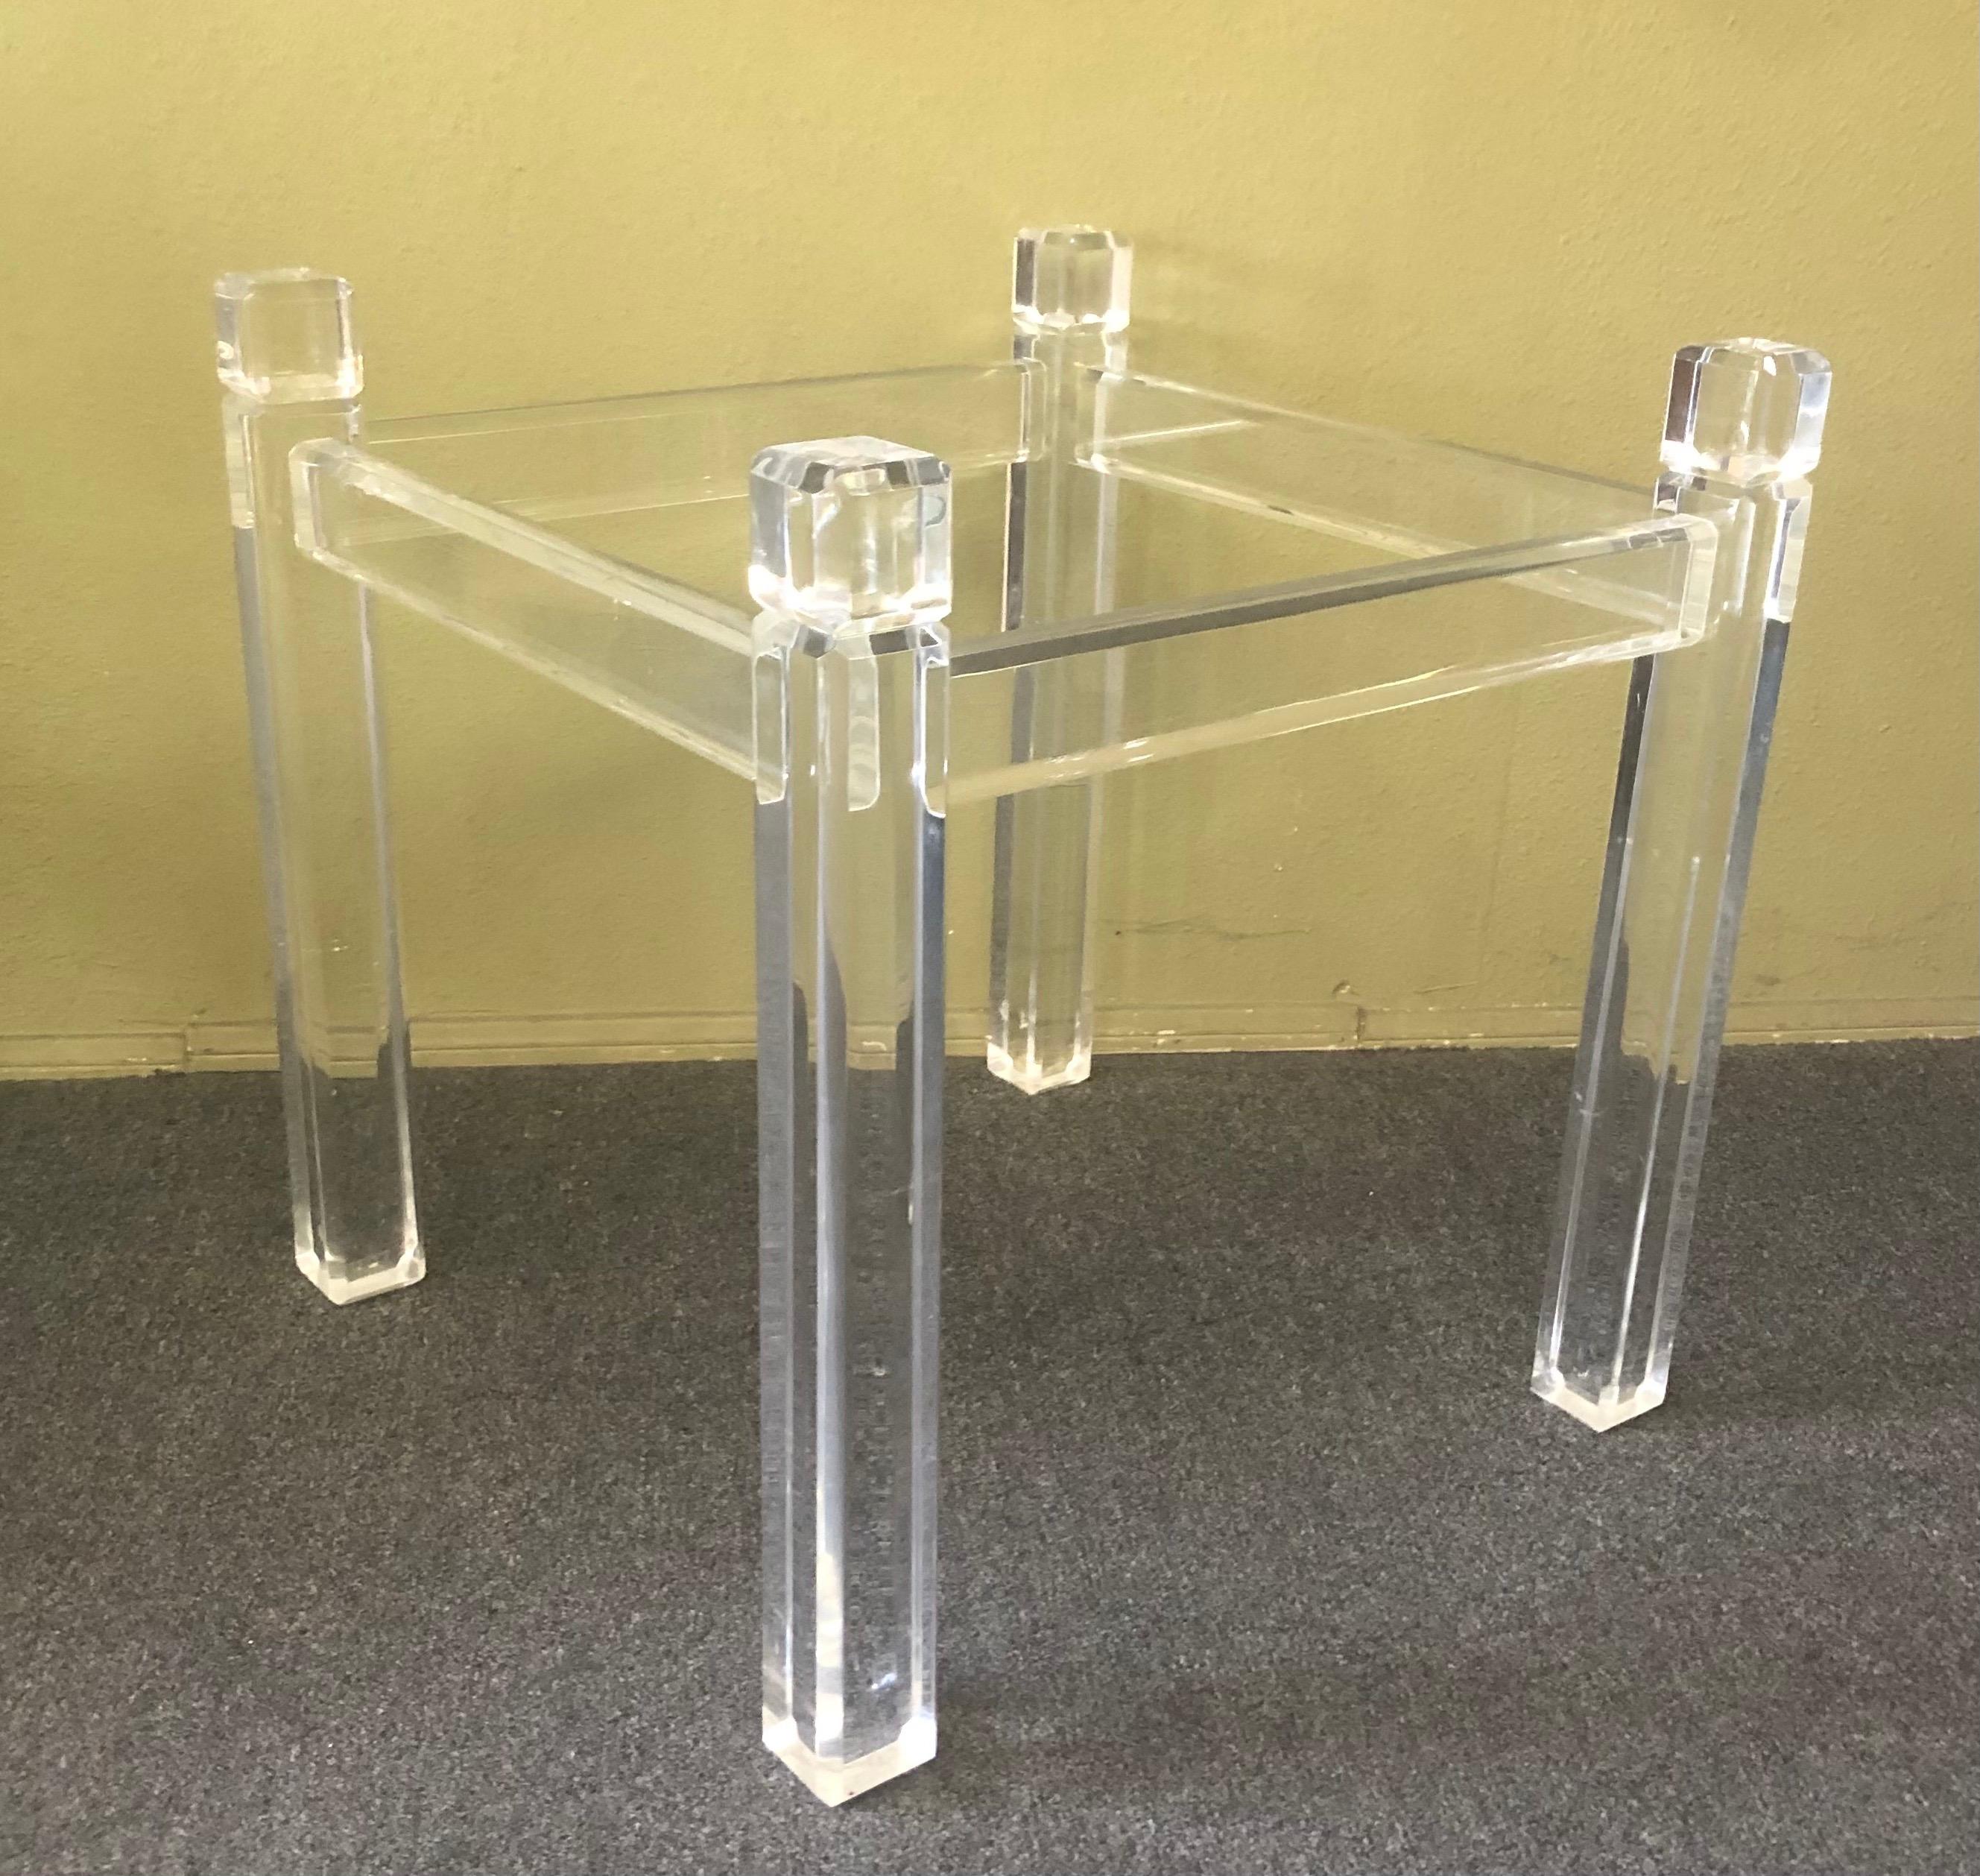 Superb midcentury Lucite table base by Charles Hollis Jones, circa 1970s. The base is finely crafted, very heavy and solid and measures 27.5